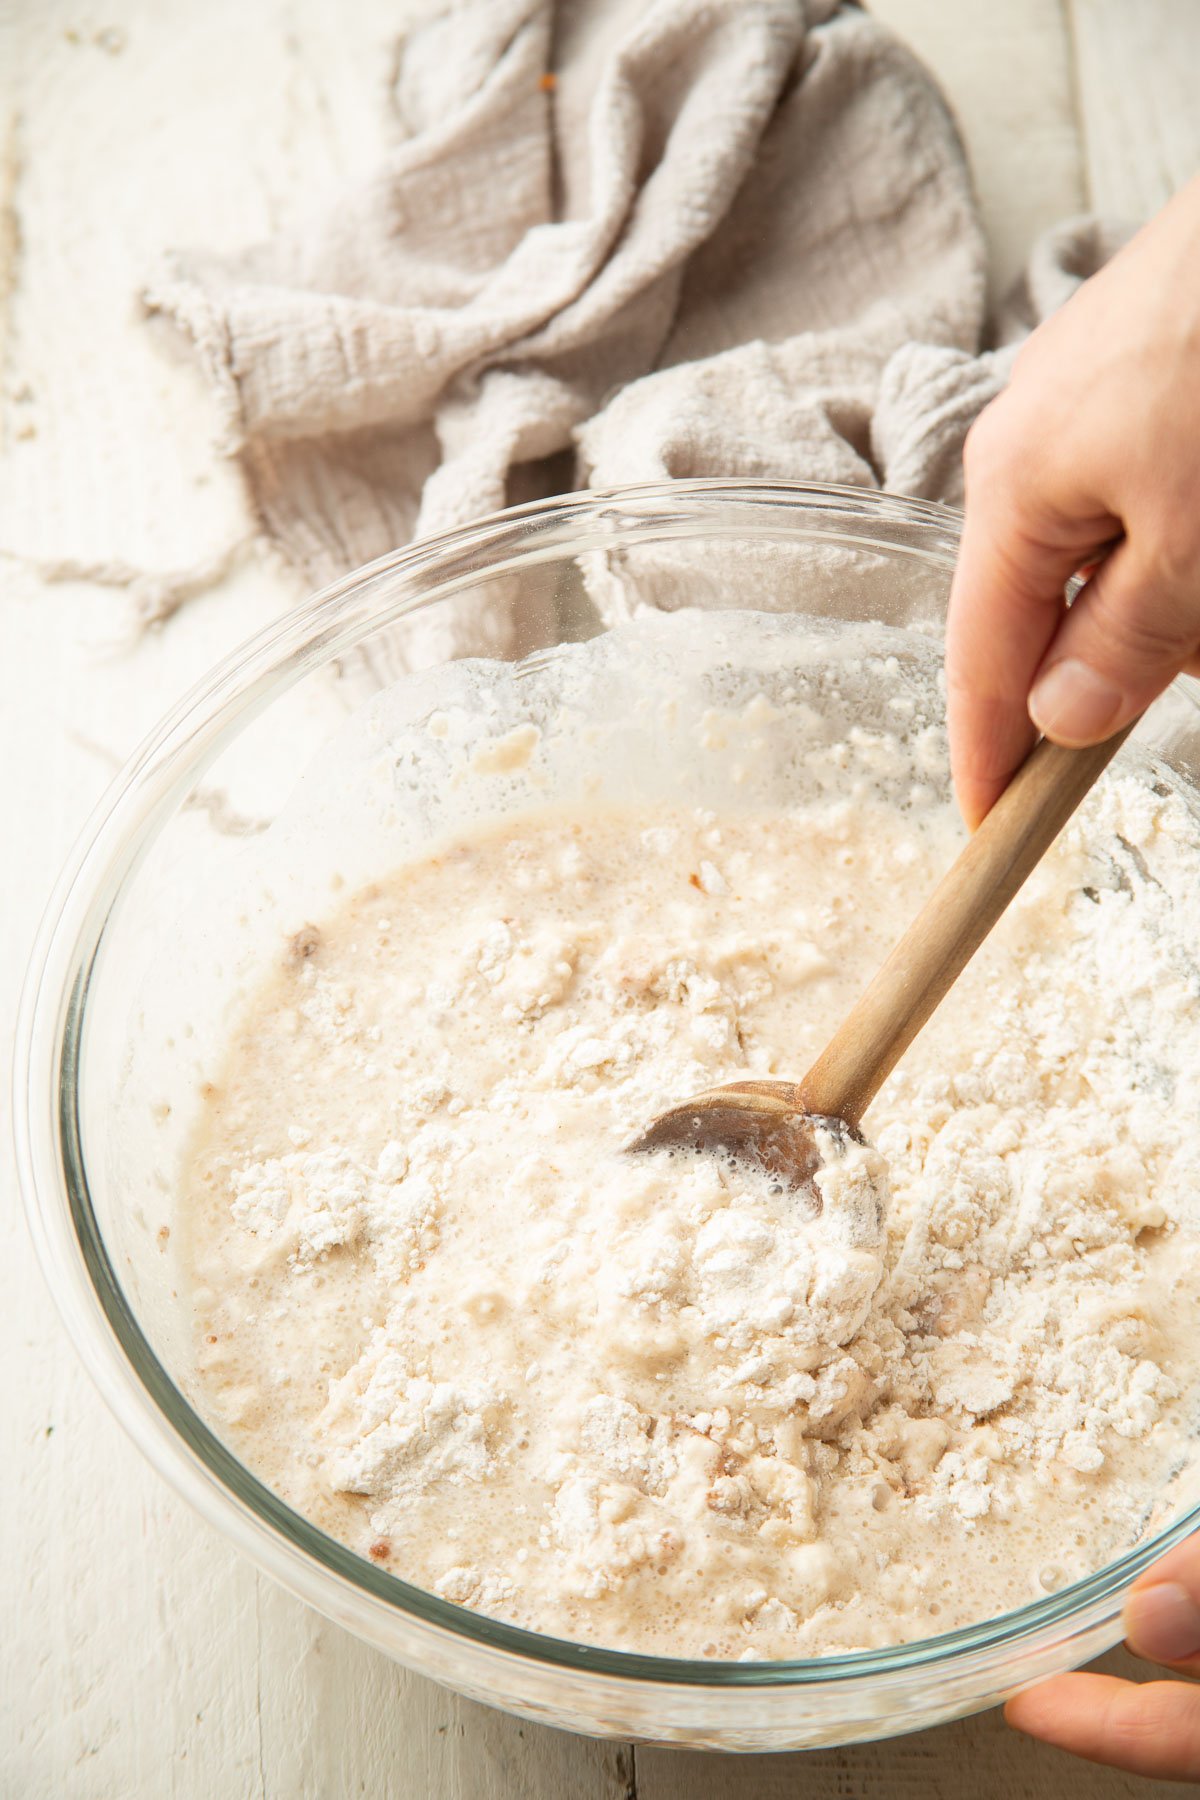 Hand stirring doughnut batter together in a glass bowl.